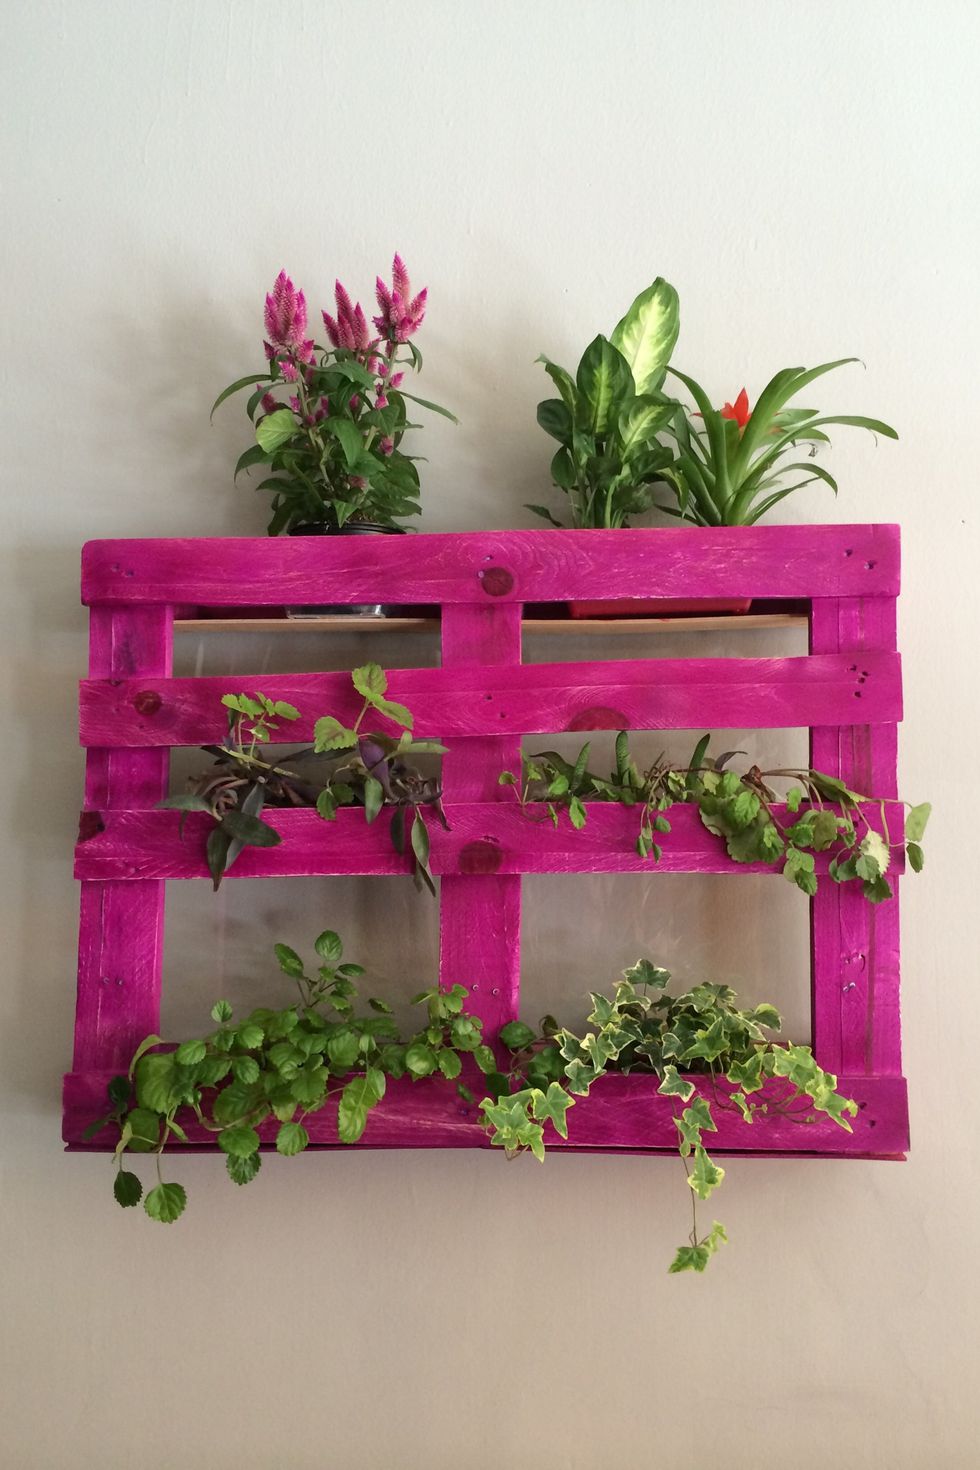 Elle Decor plants-on-pink-shelf-mounted-on-wall-at-home-royalty-free-image-677144299-1552927597.jpg